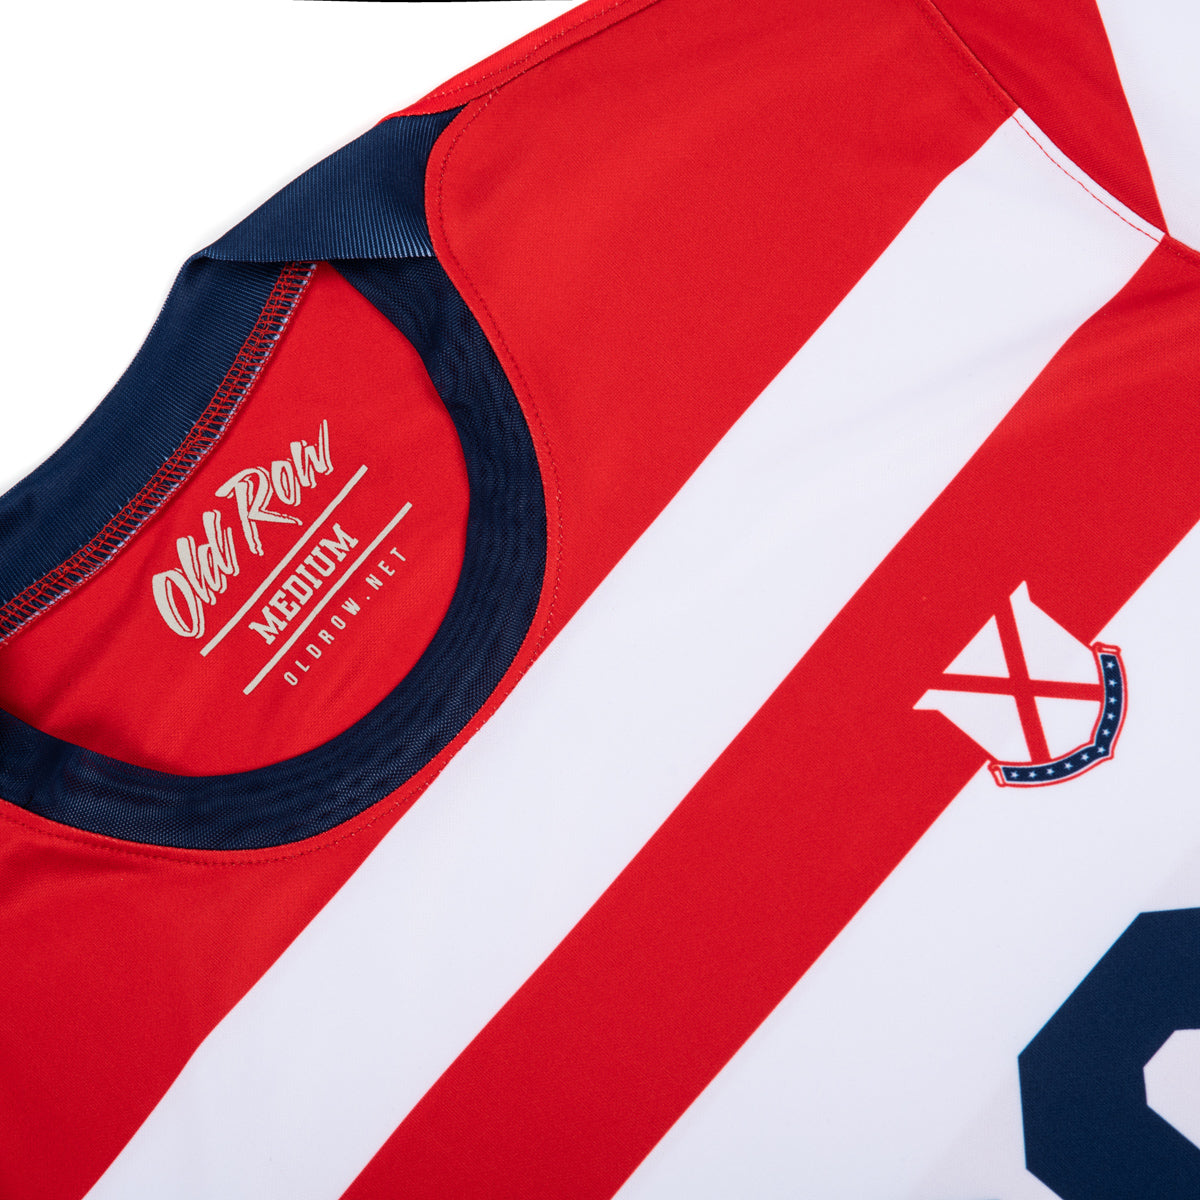 Old Row Soccer Striped Jersey - Old Row Shirts, Clothing & Merch